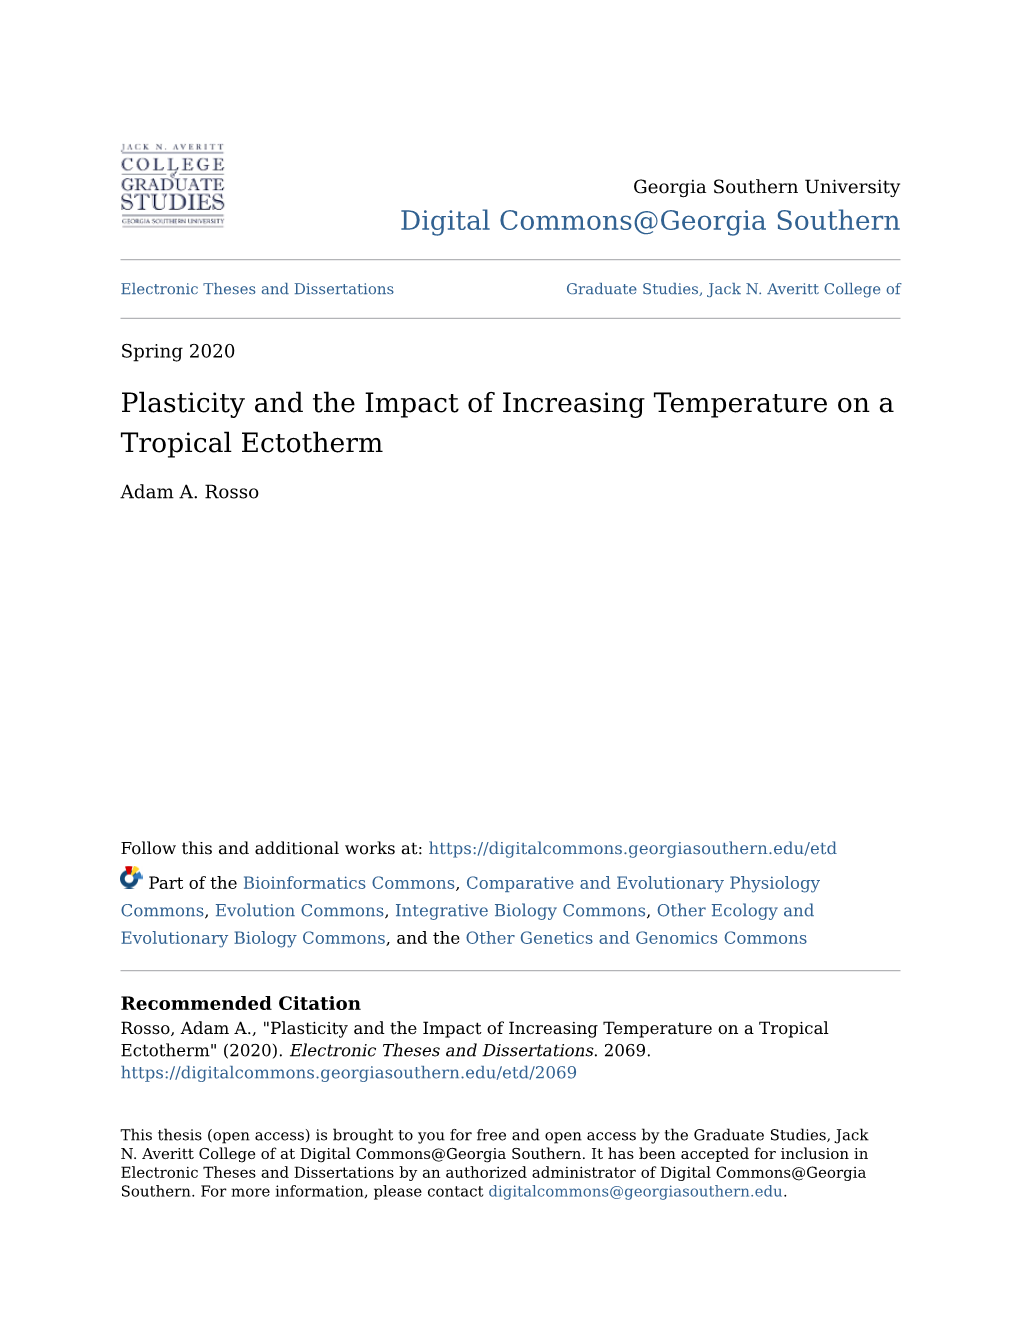 Plasticity and the Impact of Increasing Temperature on a Tropical Ectotherm